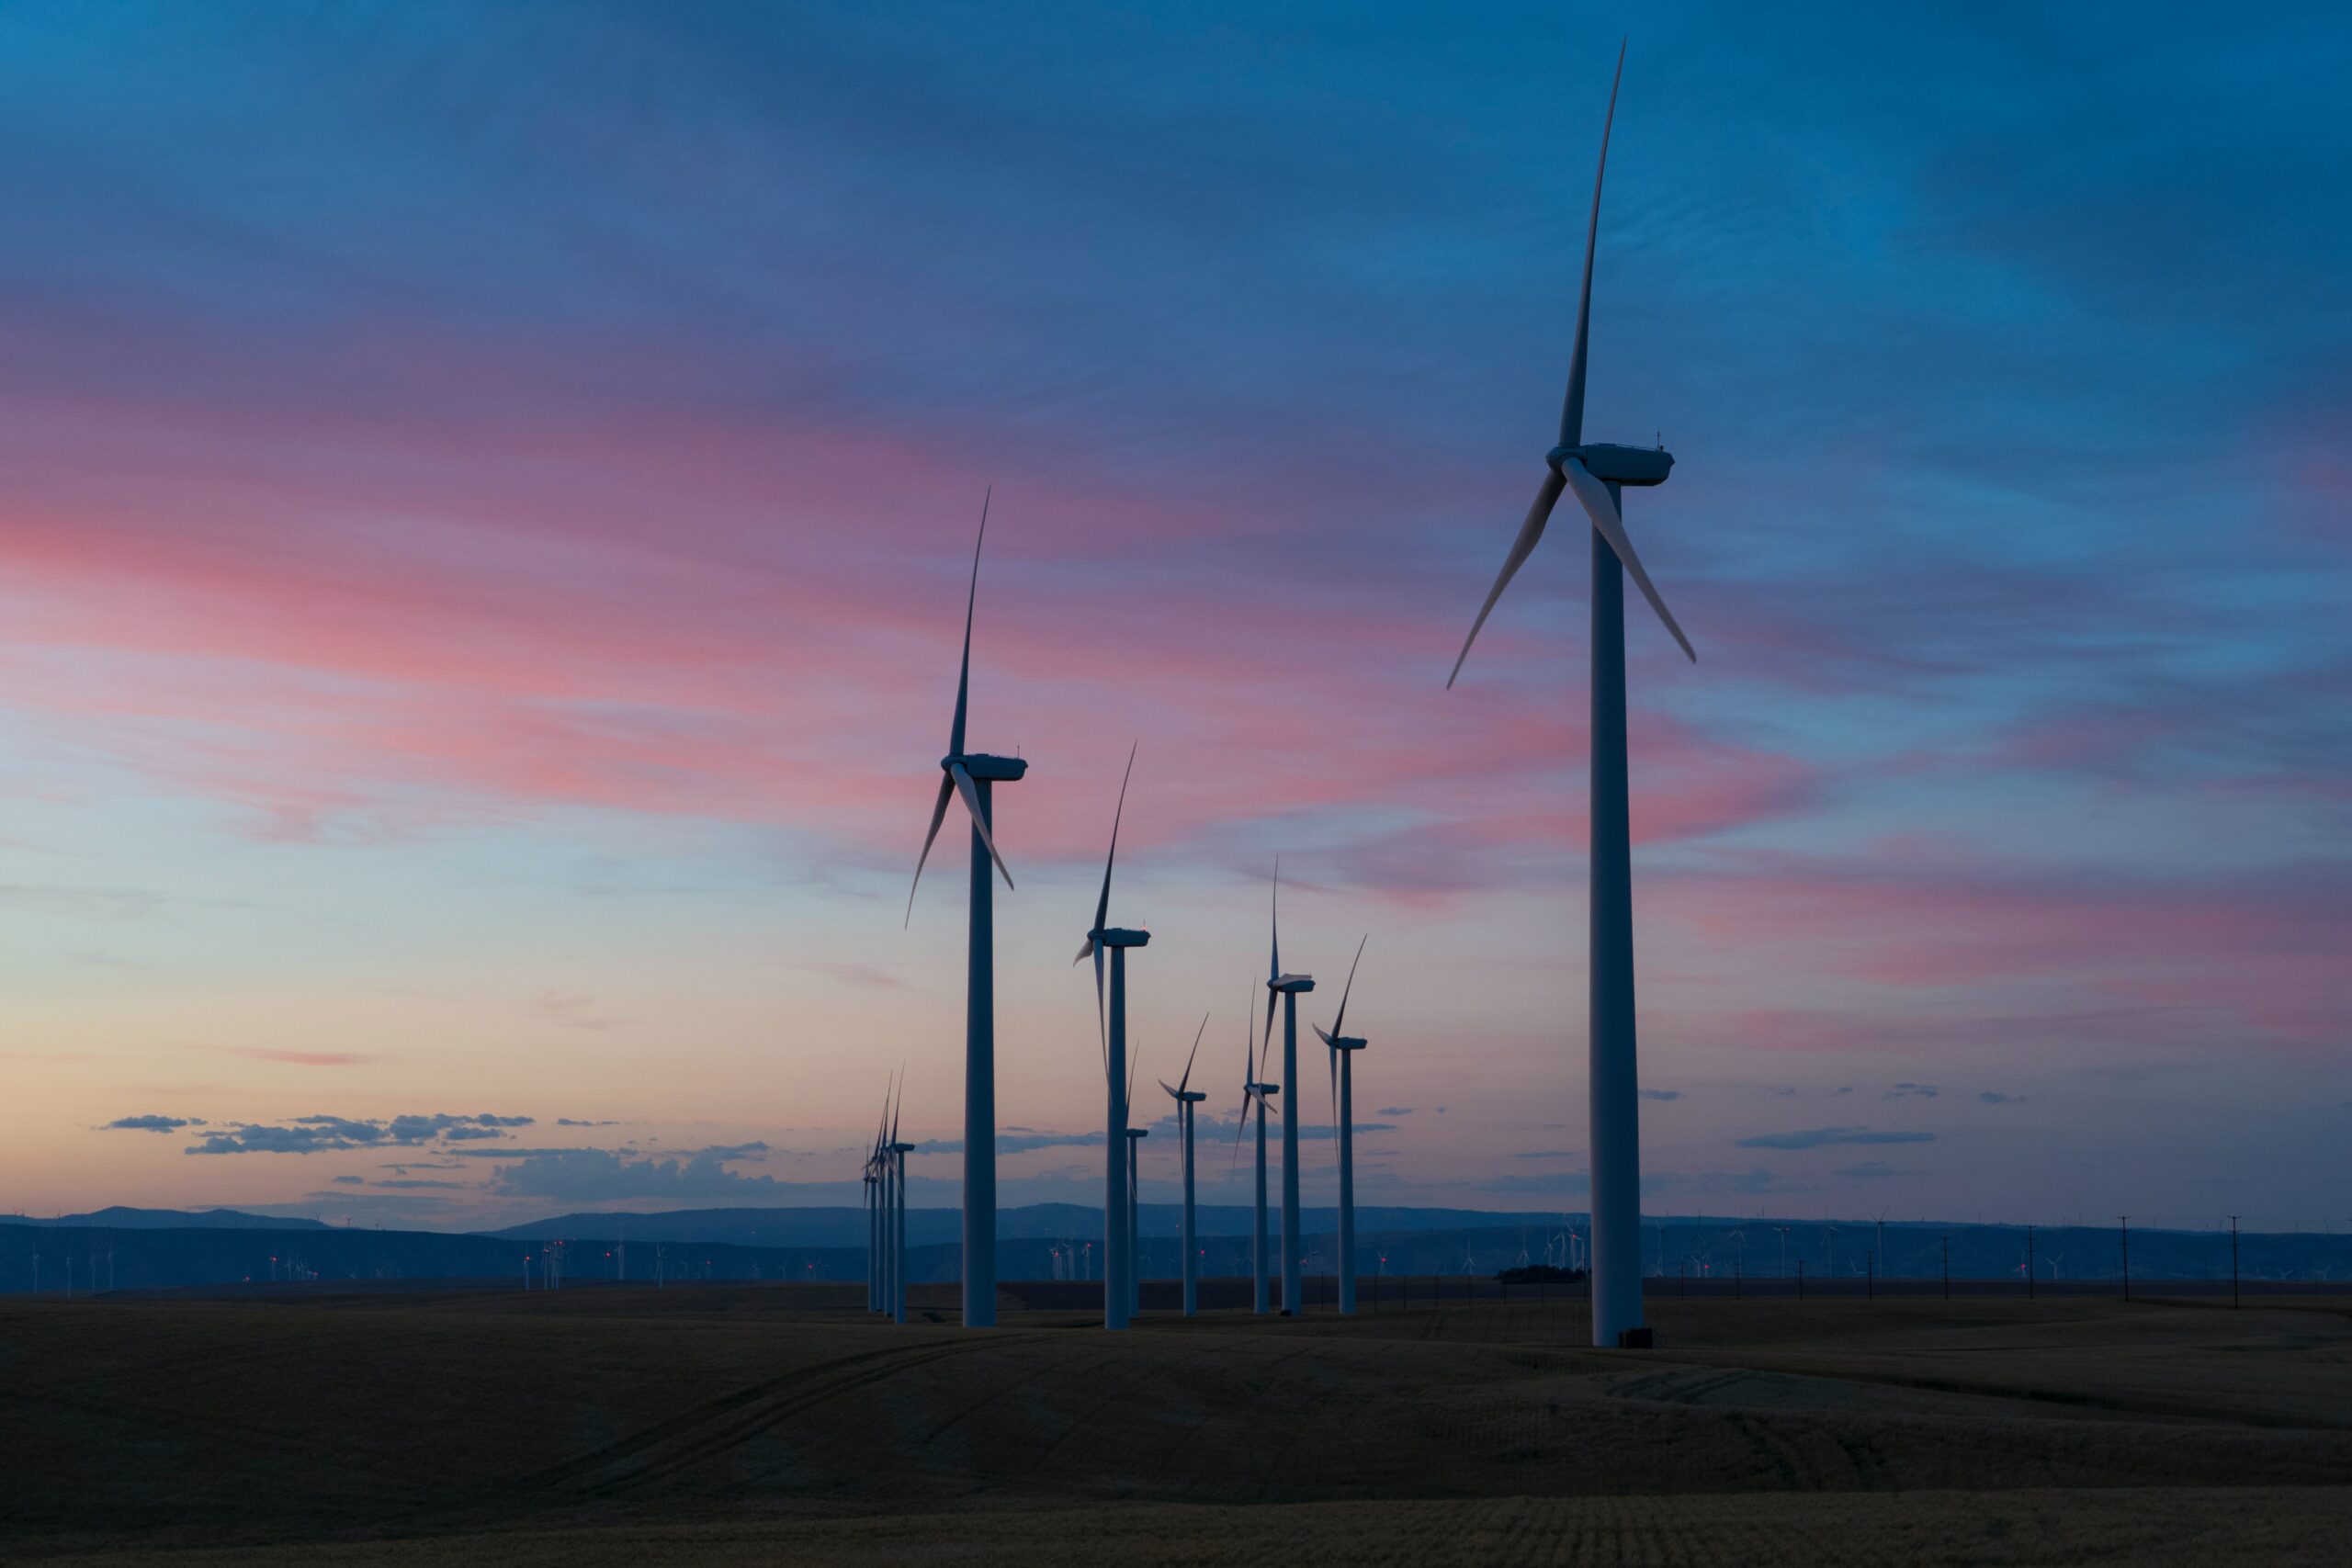 A field of wind turbines silhouetted in the sunset.